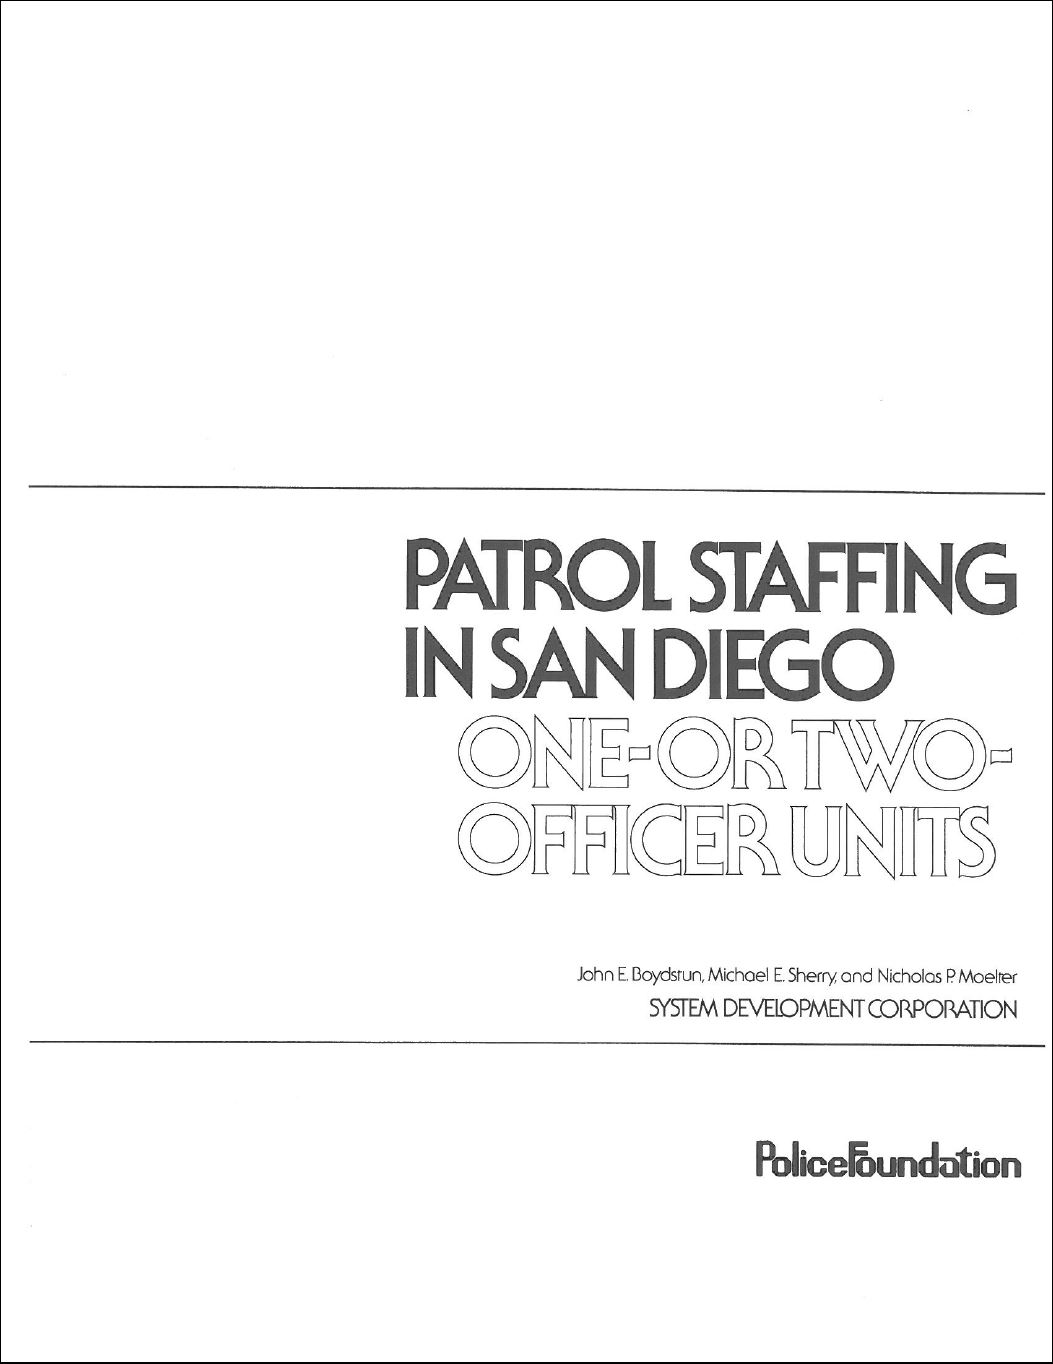 Patrol staffing in San Diego-One or two officer units_report cover